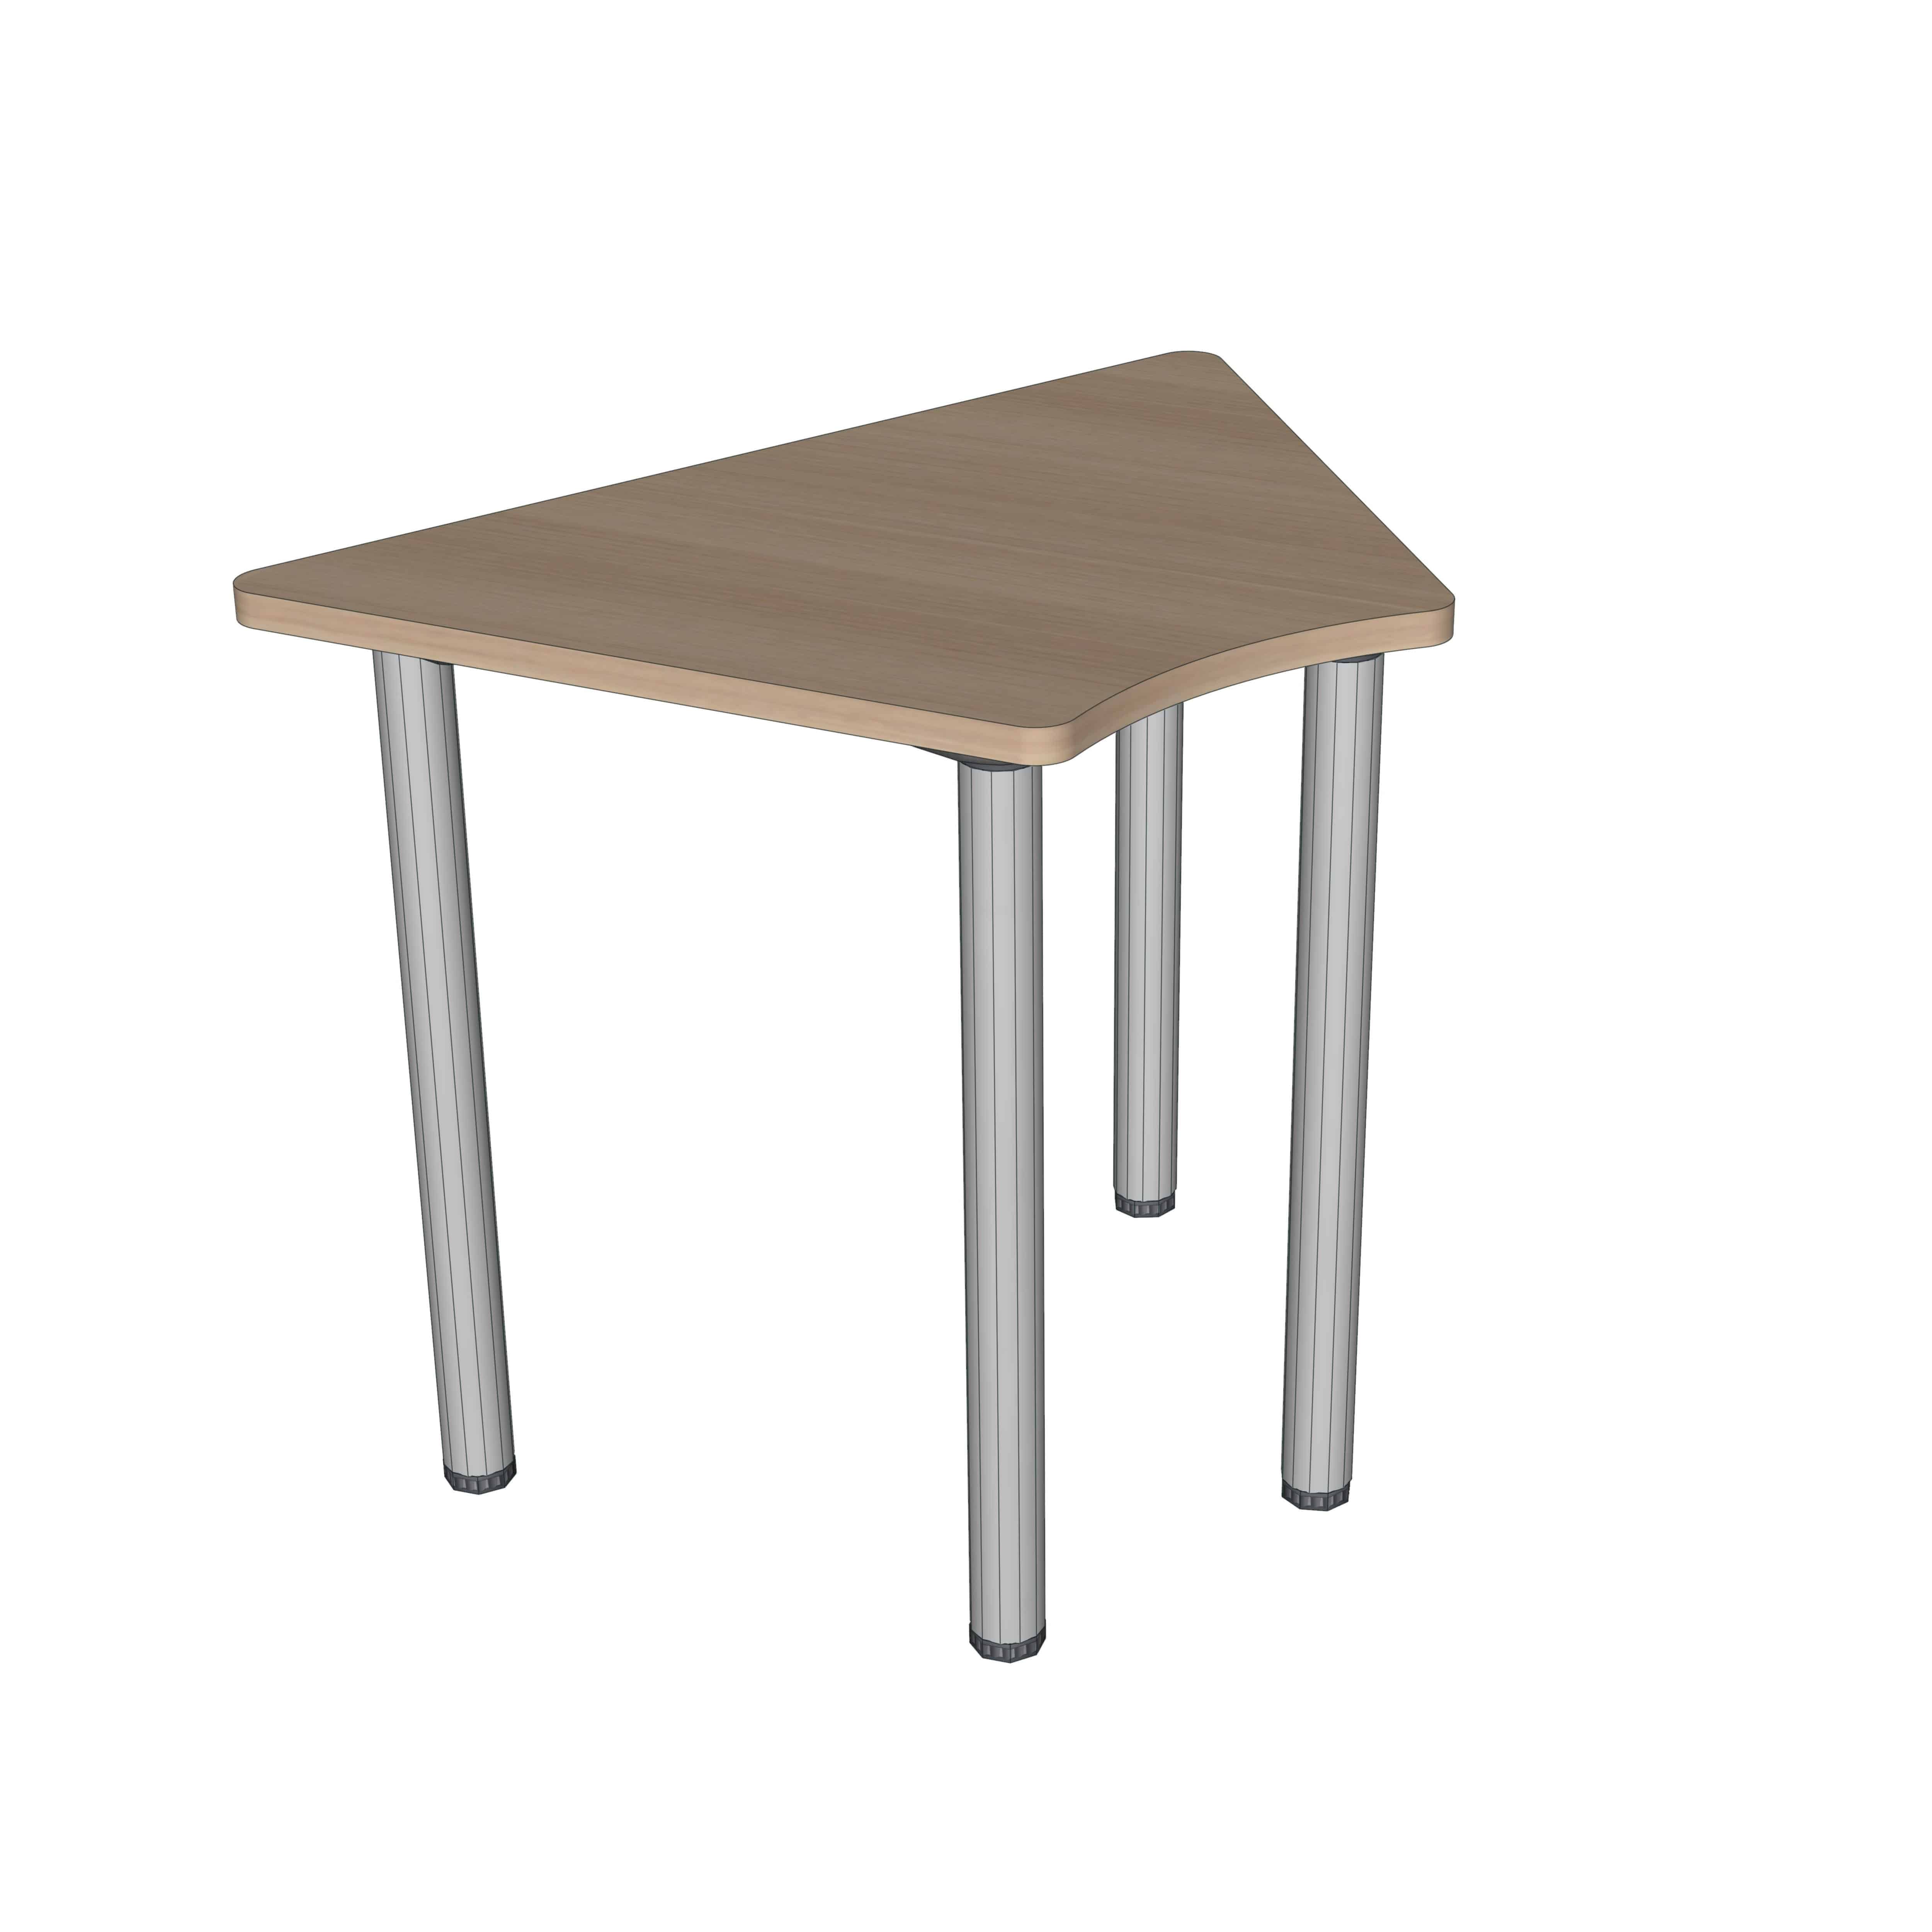 774920 - SHAPED TABLE WITH ABS EDGE (4 LEGS)